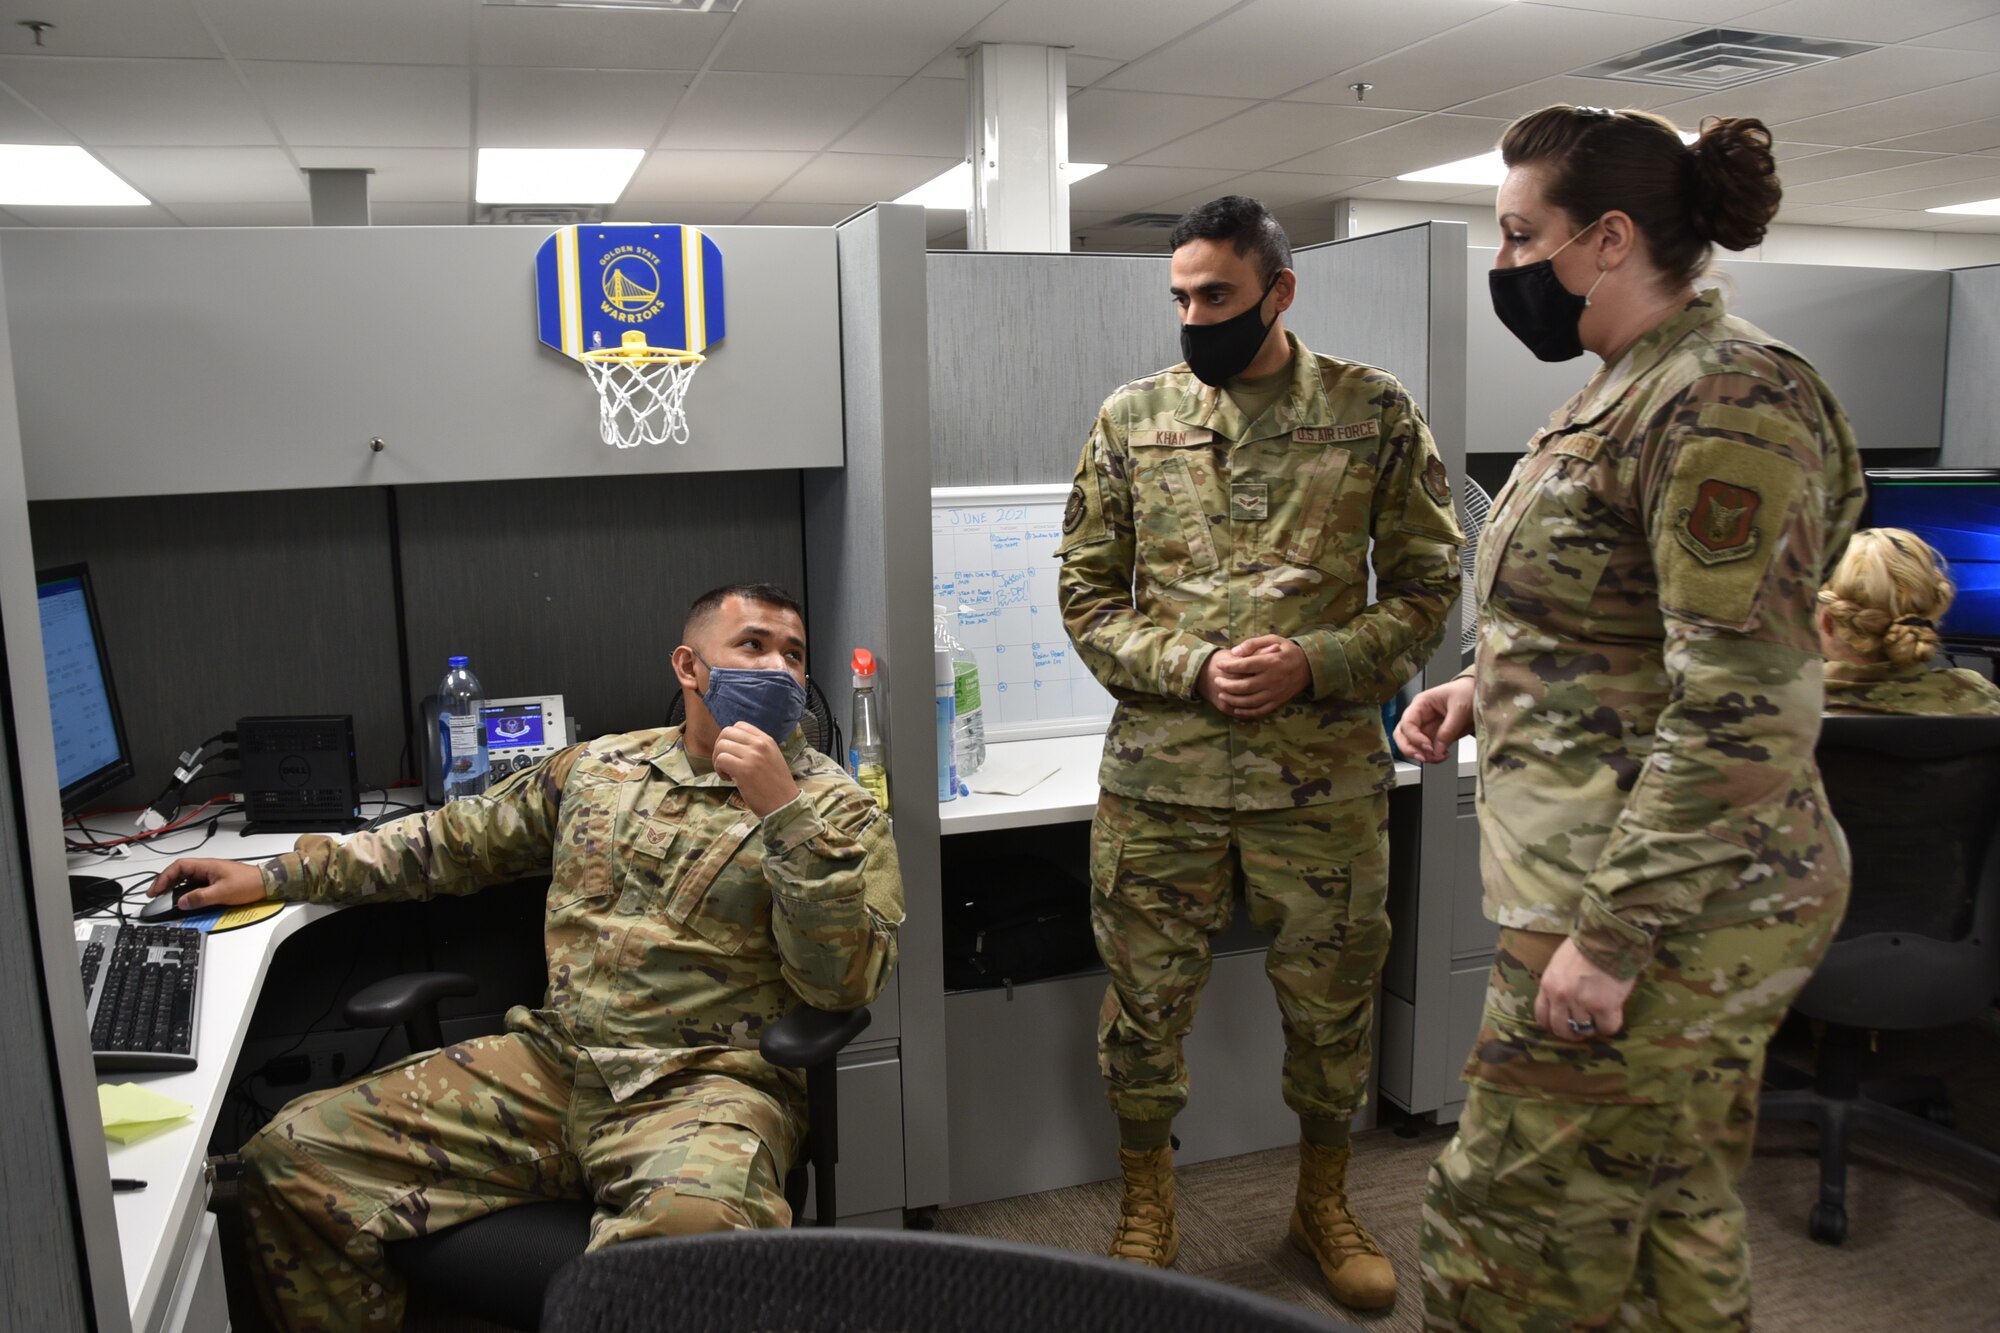 (right) 301st Fighter Wing Force Support Squadron and Wing Support Agency First Sergeant, Master Sgt. Cassandra Hernandez engages with FSS career development technicians, (left) Staff Sgt. Jose Pena and Airman First Class (center) Anwar Khan at U.S. Naval Air Station Joint Reserve Base Fort Worth, Texas on June 5th, 2021. Master Sgt. Hernandez, who has an open door policy, joined the 301 FW from the 44th Fighter Group, the wing's classic associate unit located at Eglin Air Force Base, Fla. (U.S. Air Force photo by Senior Airman William Downs)